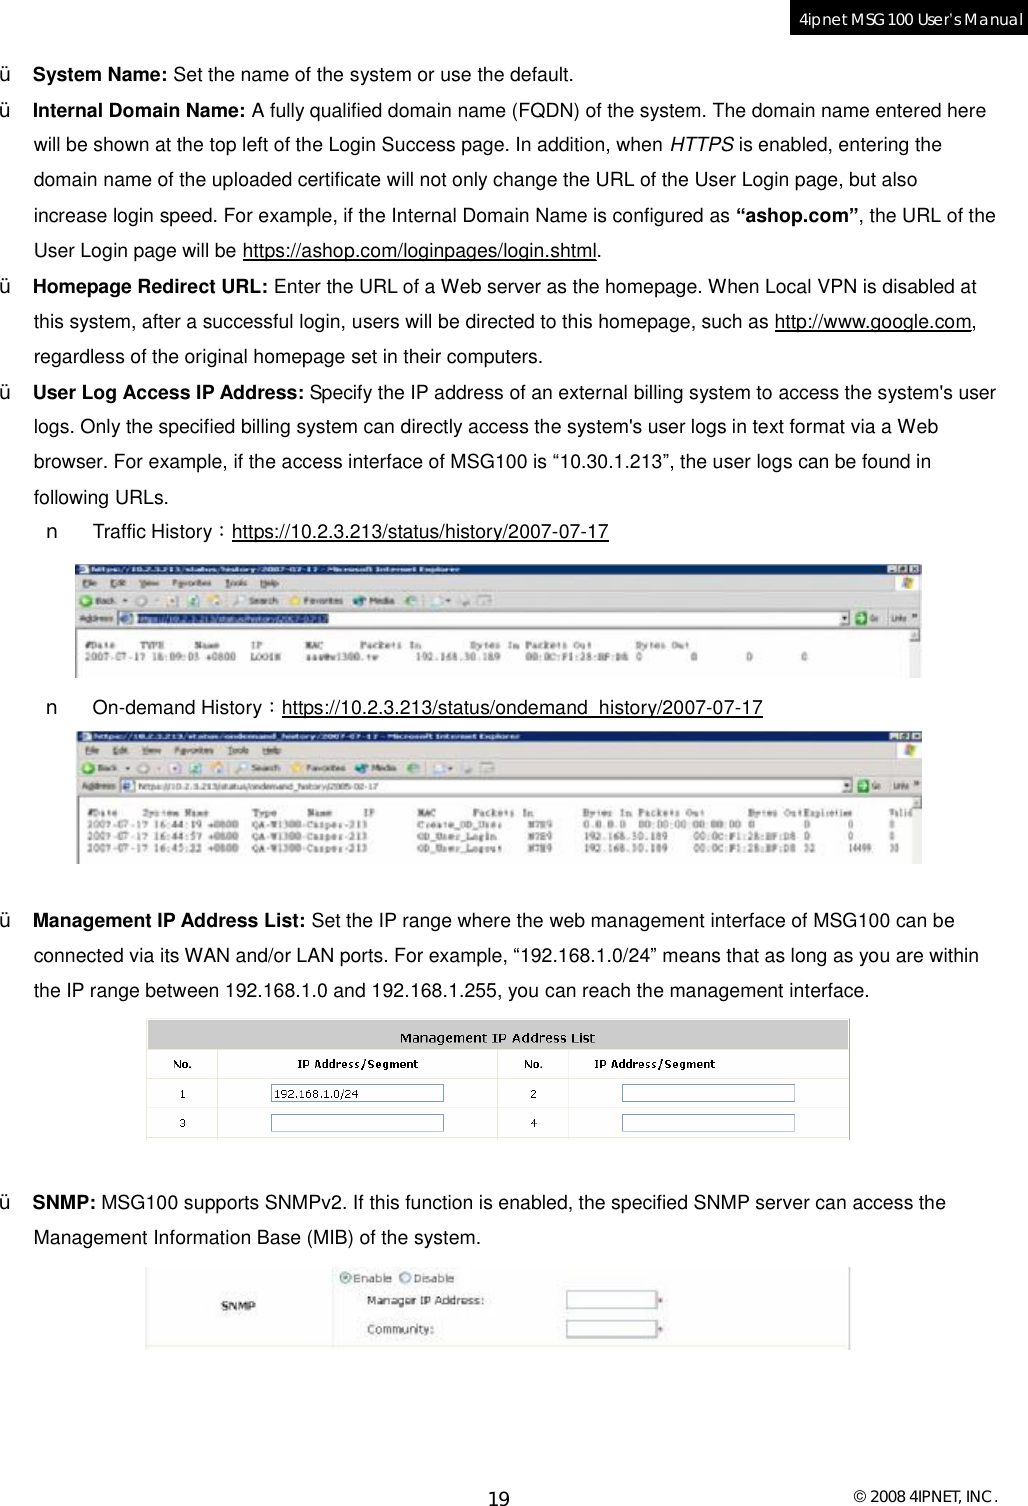  © 2008 4IPNET, INC. 19 4ipnet MSG100 User’s Manual  Ÿ System Name: Set the name of the system or use the default. Ÿ Internal Domain Name: A fully qualified domain name (FQDN) of the system. The domain name entered here will be shown at the top left of the Login Success page. In addition, when HTTPS is enabled, entering the domain name of the uploaded certificate will not only change the URL of the User Login page, but also increase login speed. For example, if the Internal Domain Name is configured as “ashop.com”, the URL of the User Login page will be https://ashop.com/loginpages/login.shtml. Ÿ Homepage Redirect URL: Enter the URL of a Web server as the homepage. When Local VPN is disabled at this system, after a successful login, users will be directed to this homepage, such as http://www.google.com, regardless of the original homepage set in their computers. Ÿ User Log Access IP Address: Specify the IP address of an external billing system to access the system&apos;s user logs. Only the specified billing system can directly access the system&apos;s user logs in text format via a Web browser. For example, if the access interface of MSG100 is “10.30.1.213”, the user logs can be found in following URLs. n Traffic History：https://10.2.3.213/status/history/2007-07-17  n On-demand History：https://10.2.3.213/status/ondemand_history/2007-07-17   Ÿ Management IP Address List: Set the IP range where the web management interface of MSG100 can be connected via its WAN and/or LAN ports. For example, “192.168.1.0/24” means that as long as you are within the IP range between 192.168.1.0 and 192.168.1.255, you can reach the management interface.   Ÿ SNMP: MSG100 supports SNMPv2. If this function is enabled, the specified SNMP server can access the Management Information Base (MIB) of the system.     